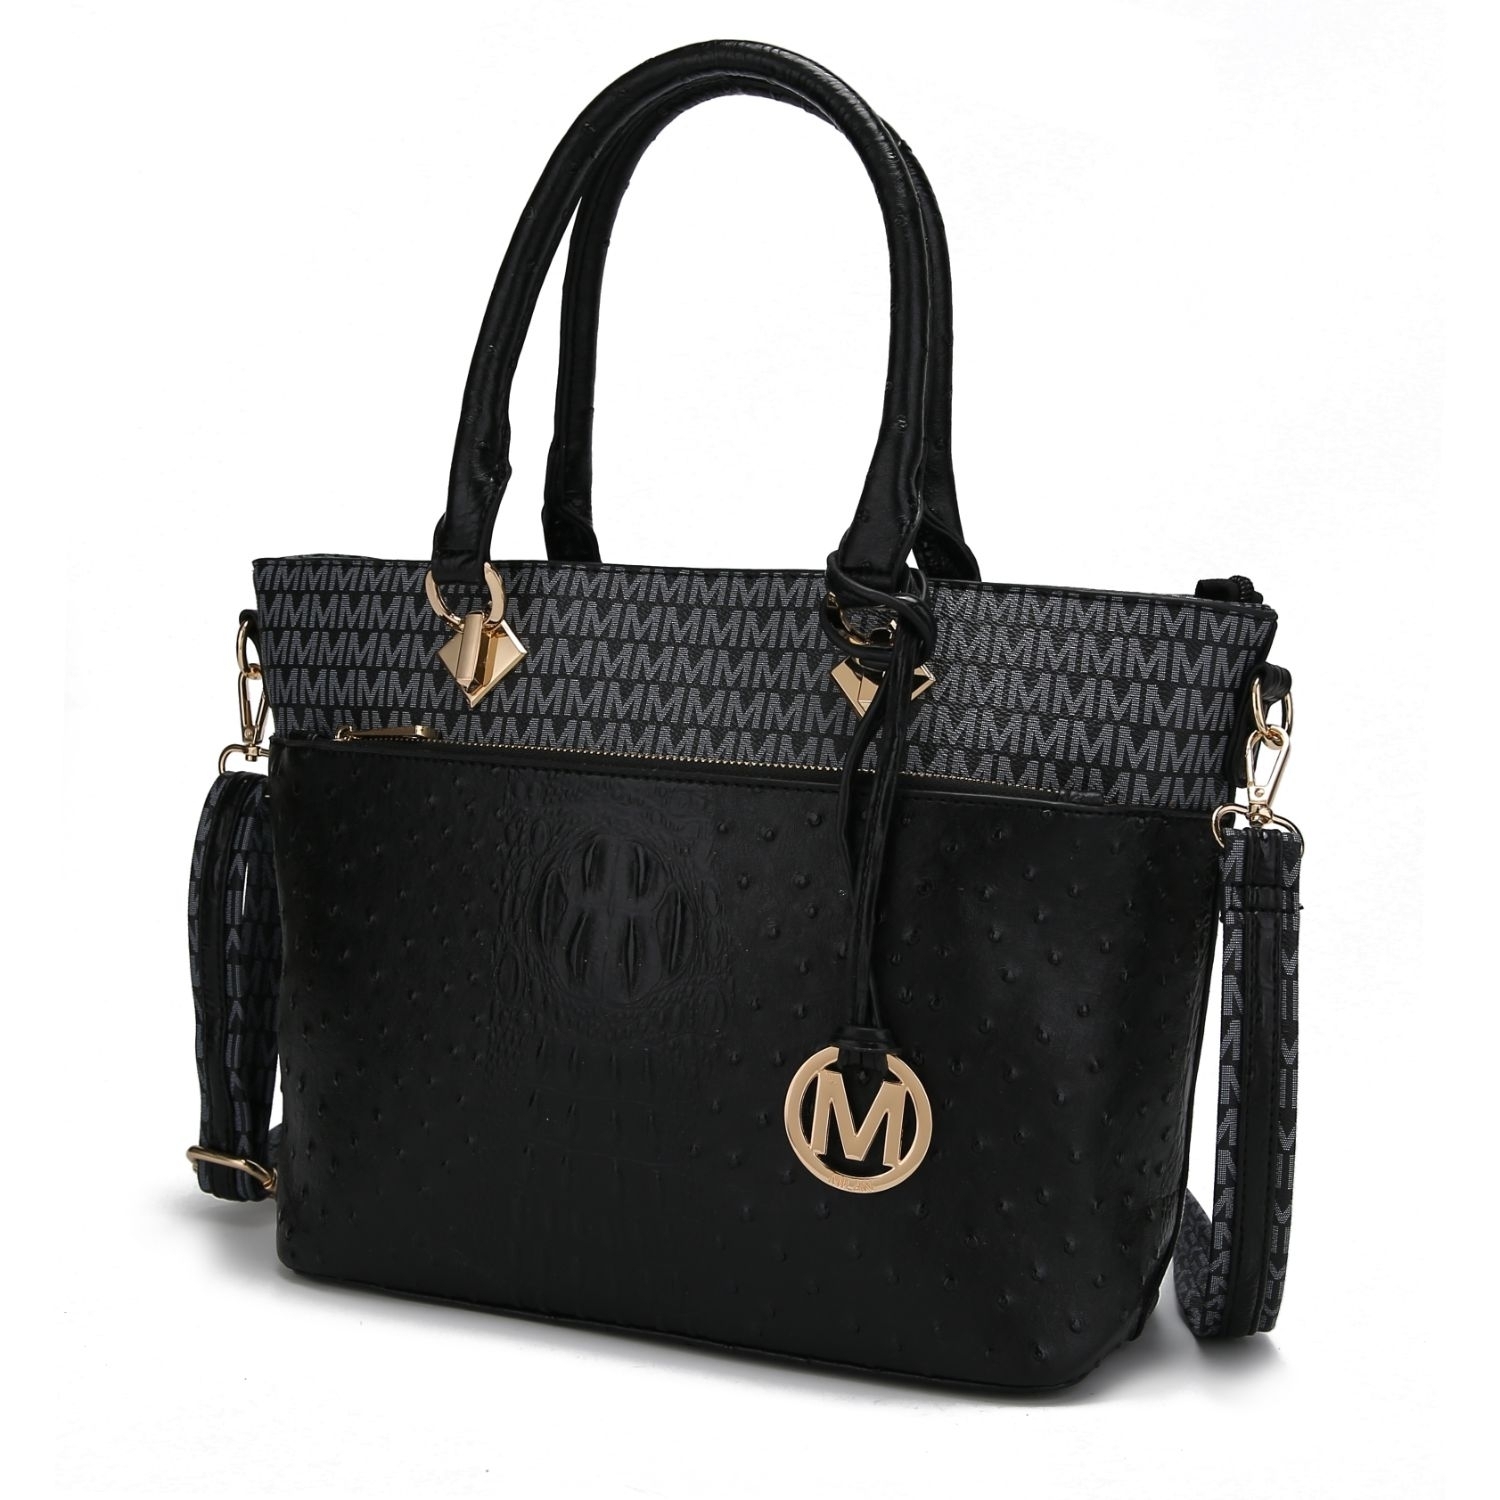 MKF Collection Grace Signature And Croc Embossed Tote Handbag By Mia K. - Black